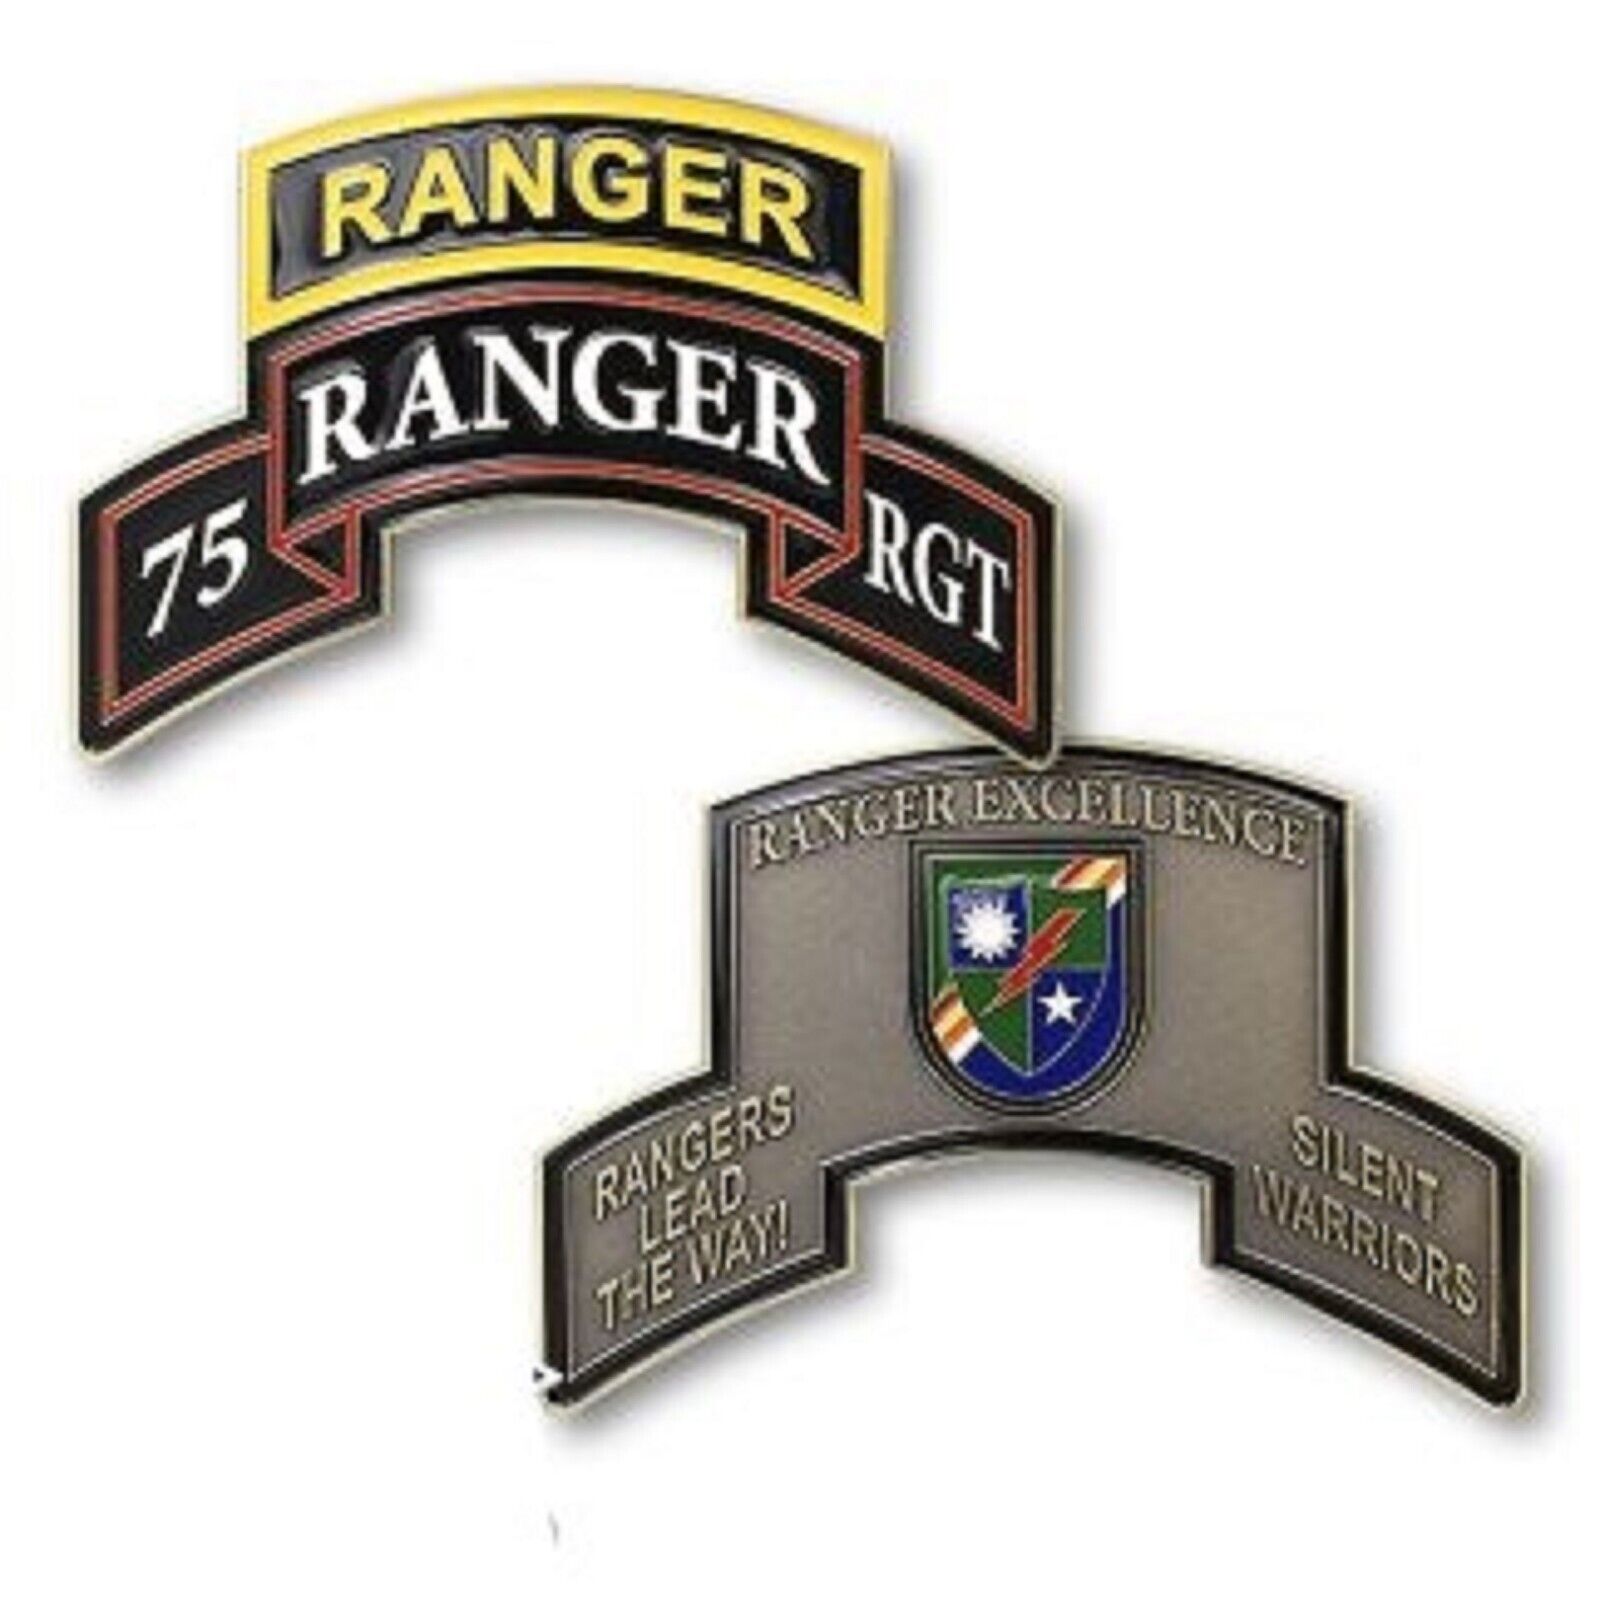 ARMY 75TH REGIMENT RANGER EXCELLENCE 3.75